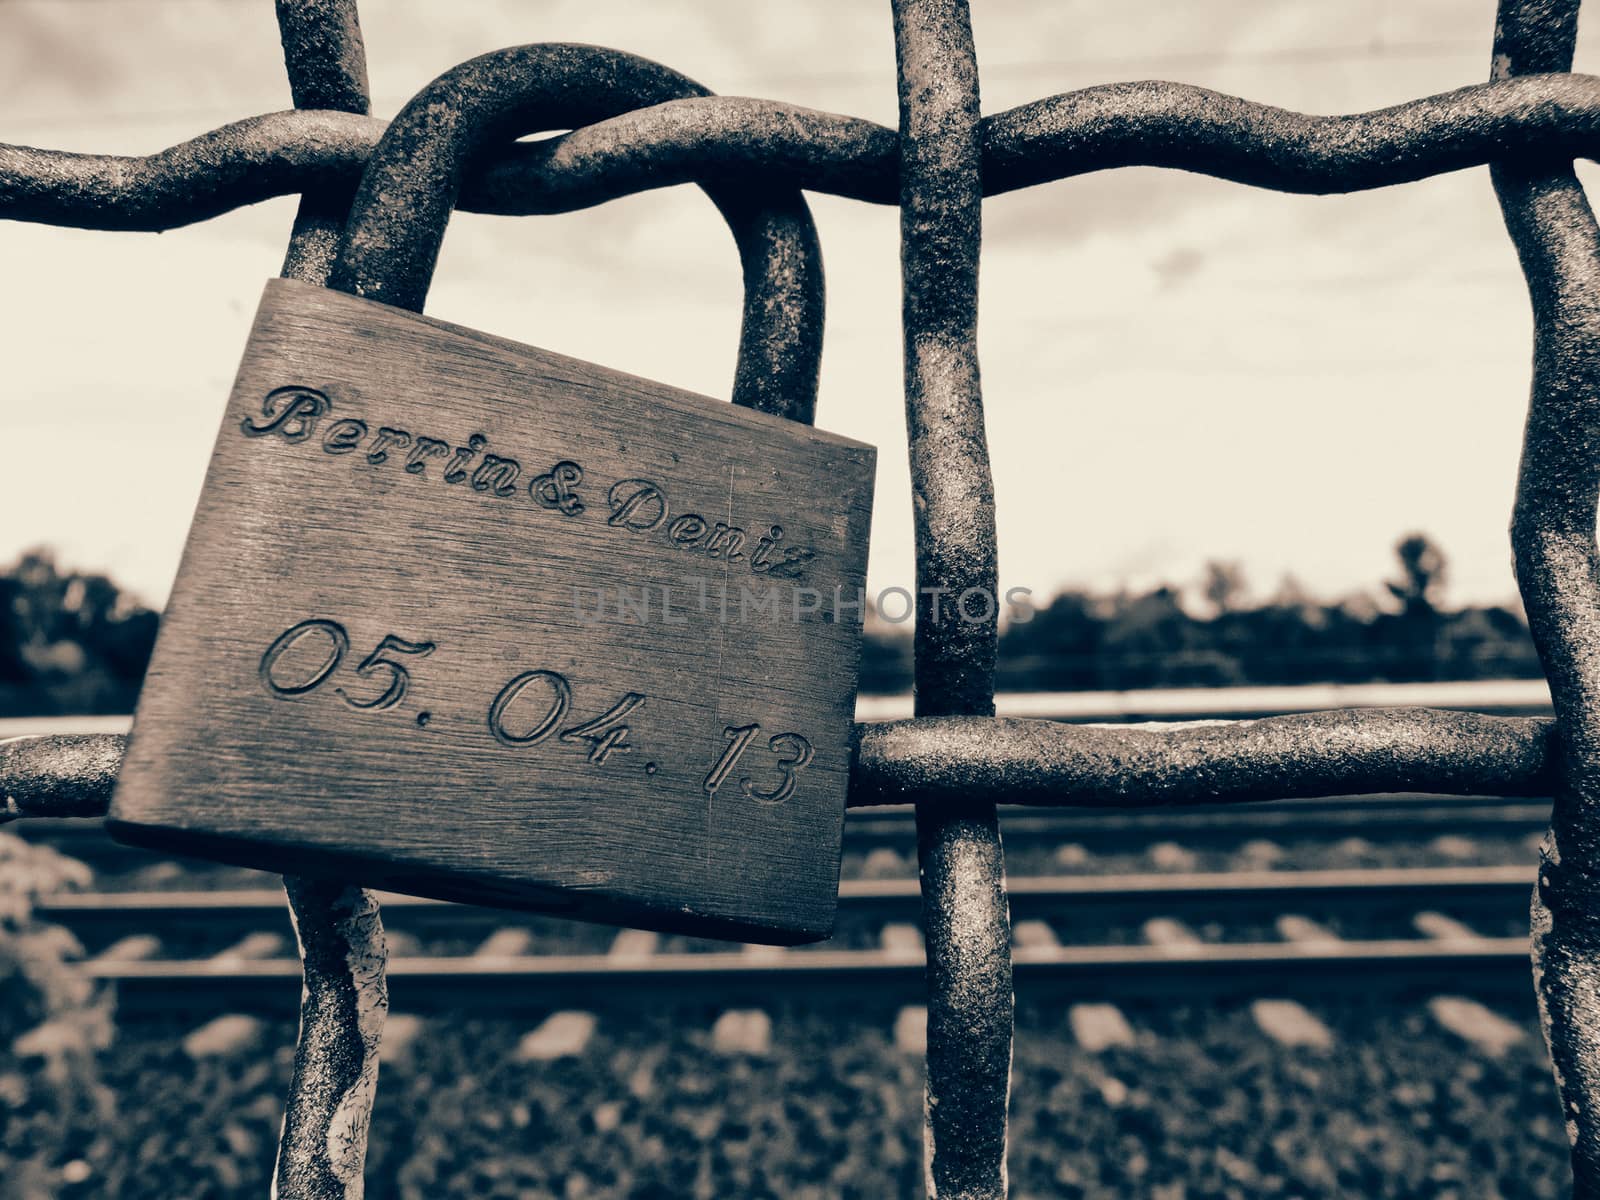 Monochrome close up of an old rusty padlock chained to a railing.